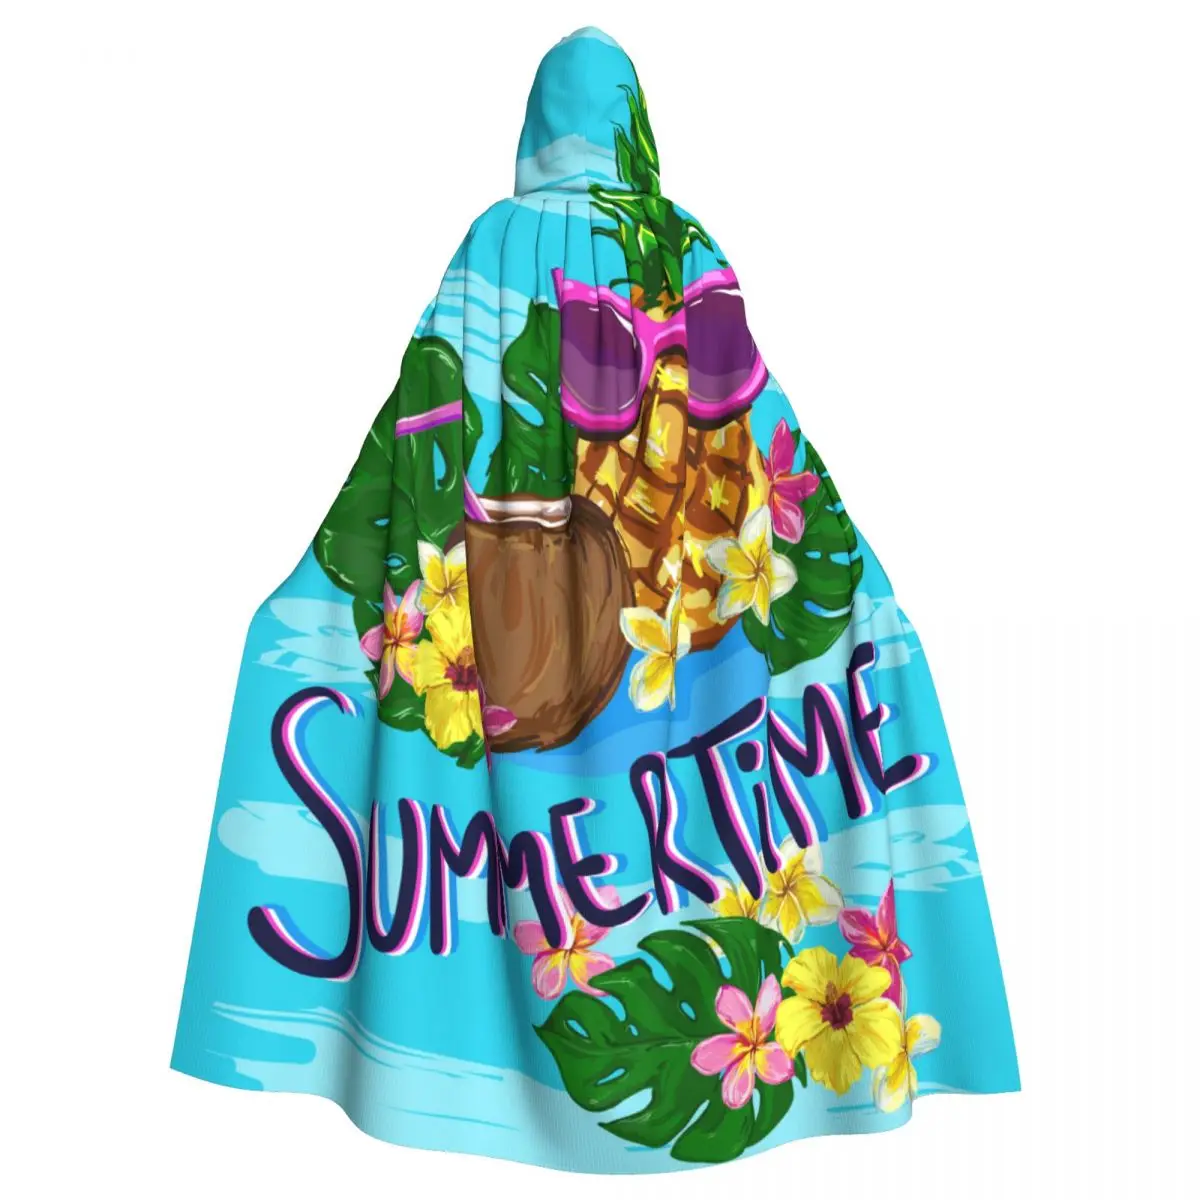 

Summertime Pineapple Sunglasses Tropical Flowers Hooded Cloak Polyester Unisex Witch Cape Costume Accessory